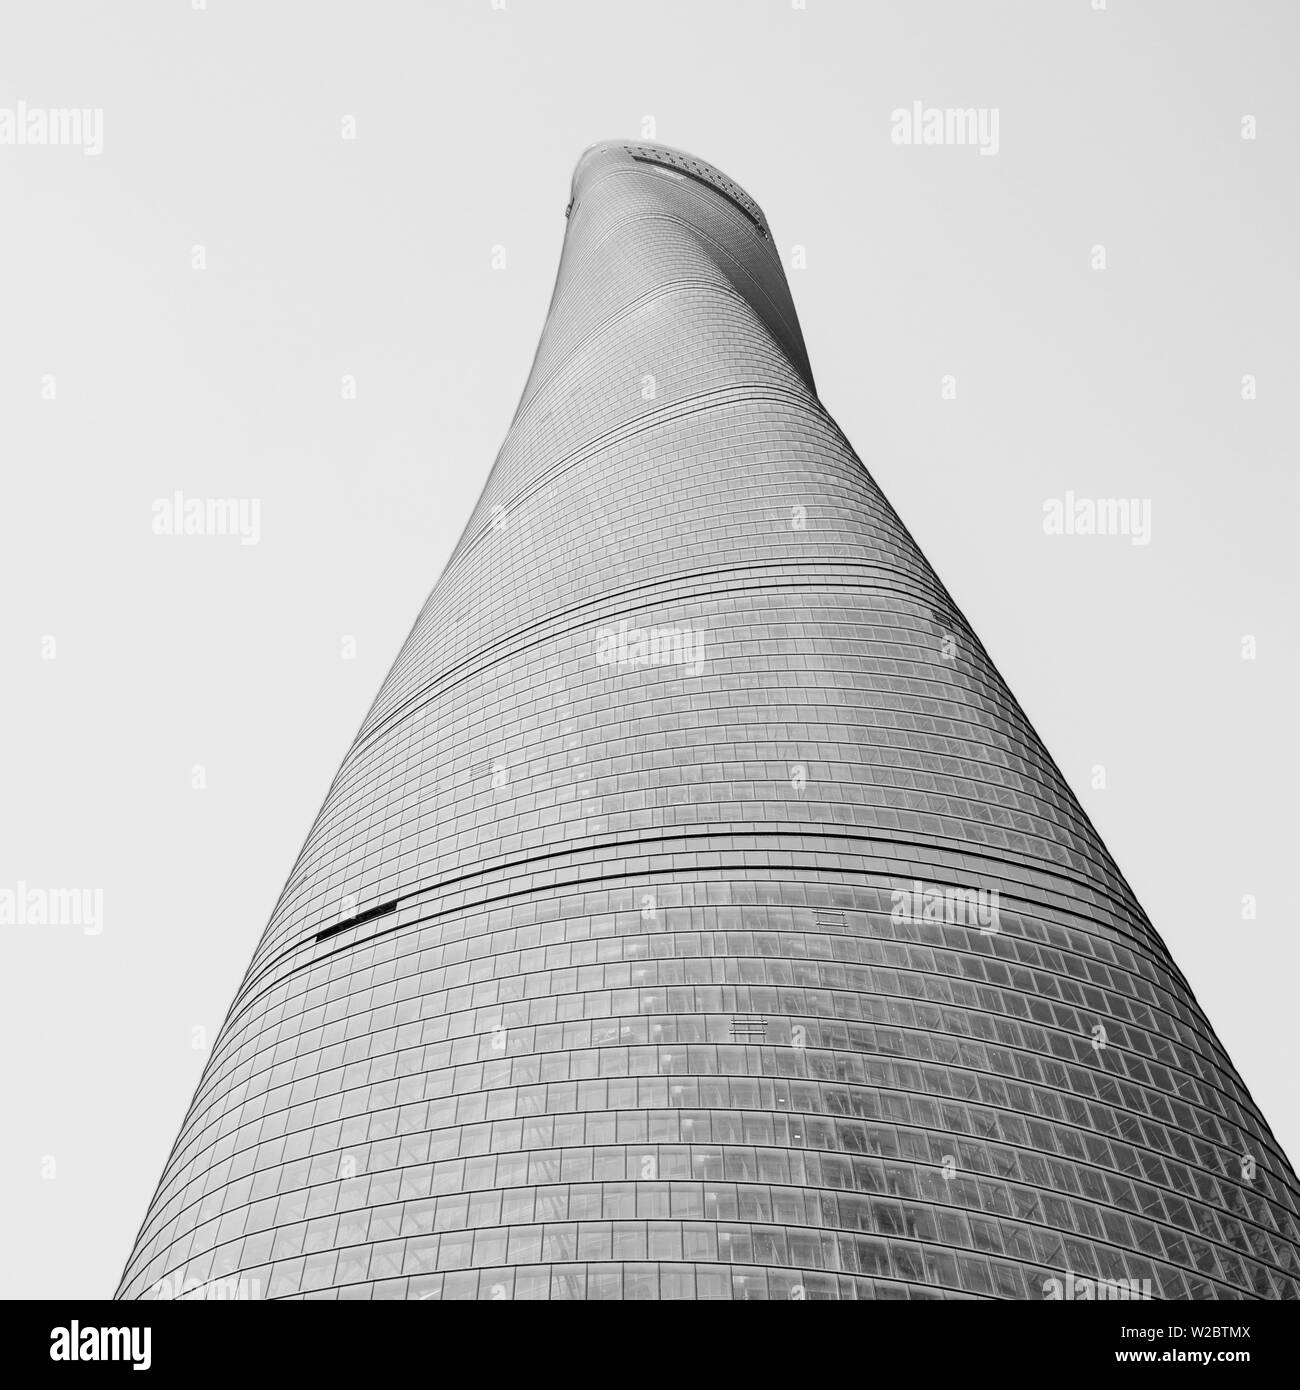 Shanghai Tower (2nd tallest building in the world in 2014), Lujiazui, Pudong, Shanghai, China Stock Photo